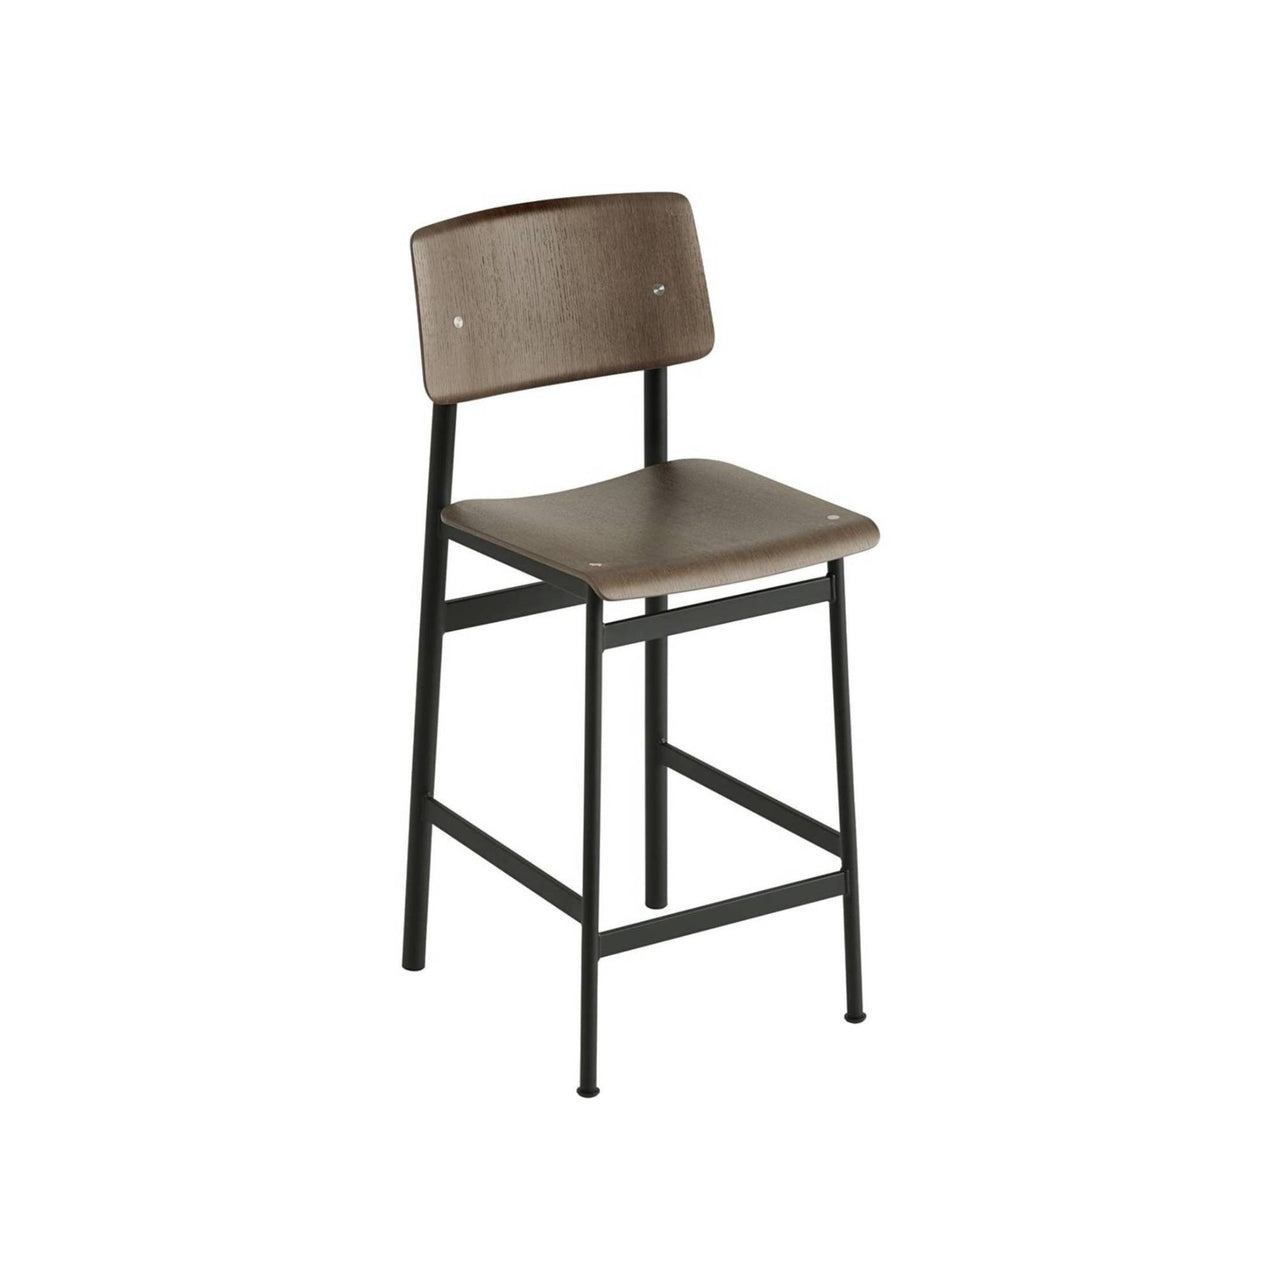 Loft Bar + Counter Stool: Counter + Black + Stained Dark Brown